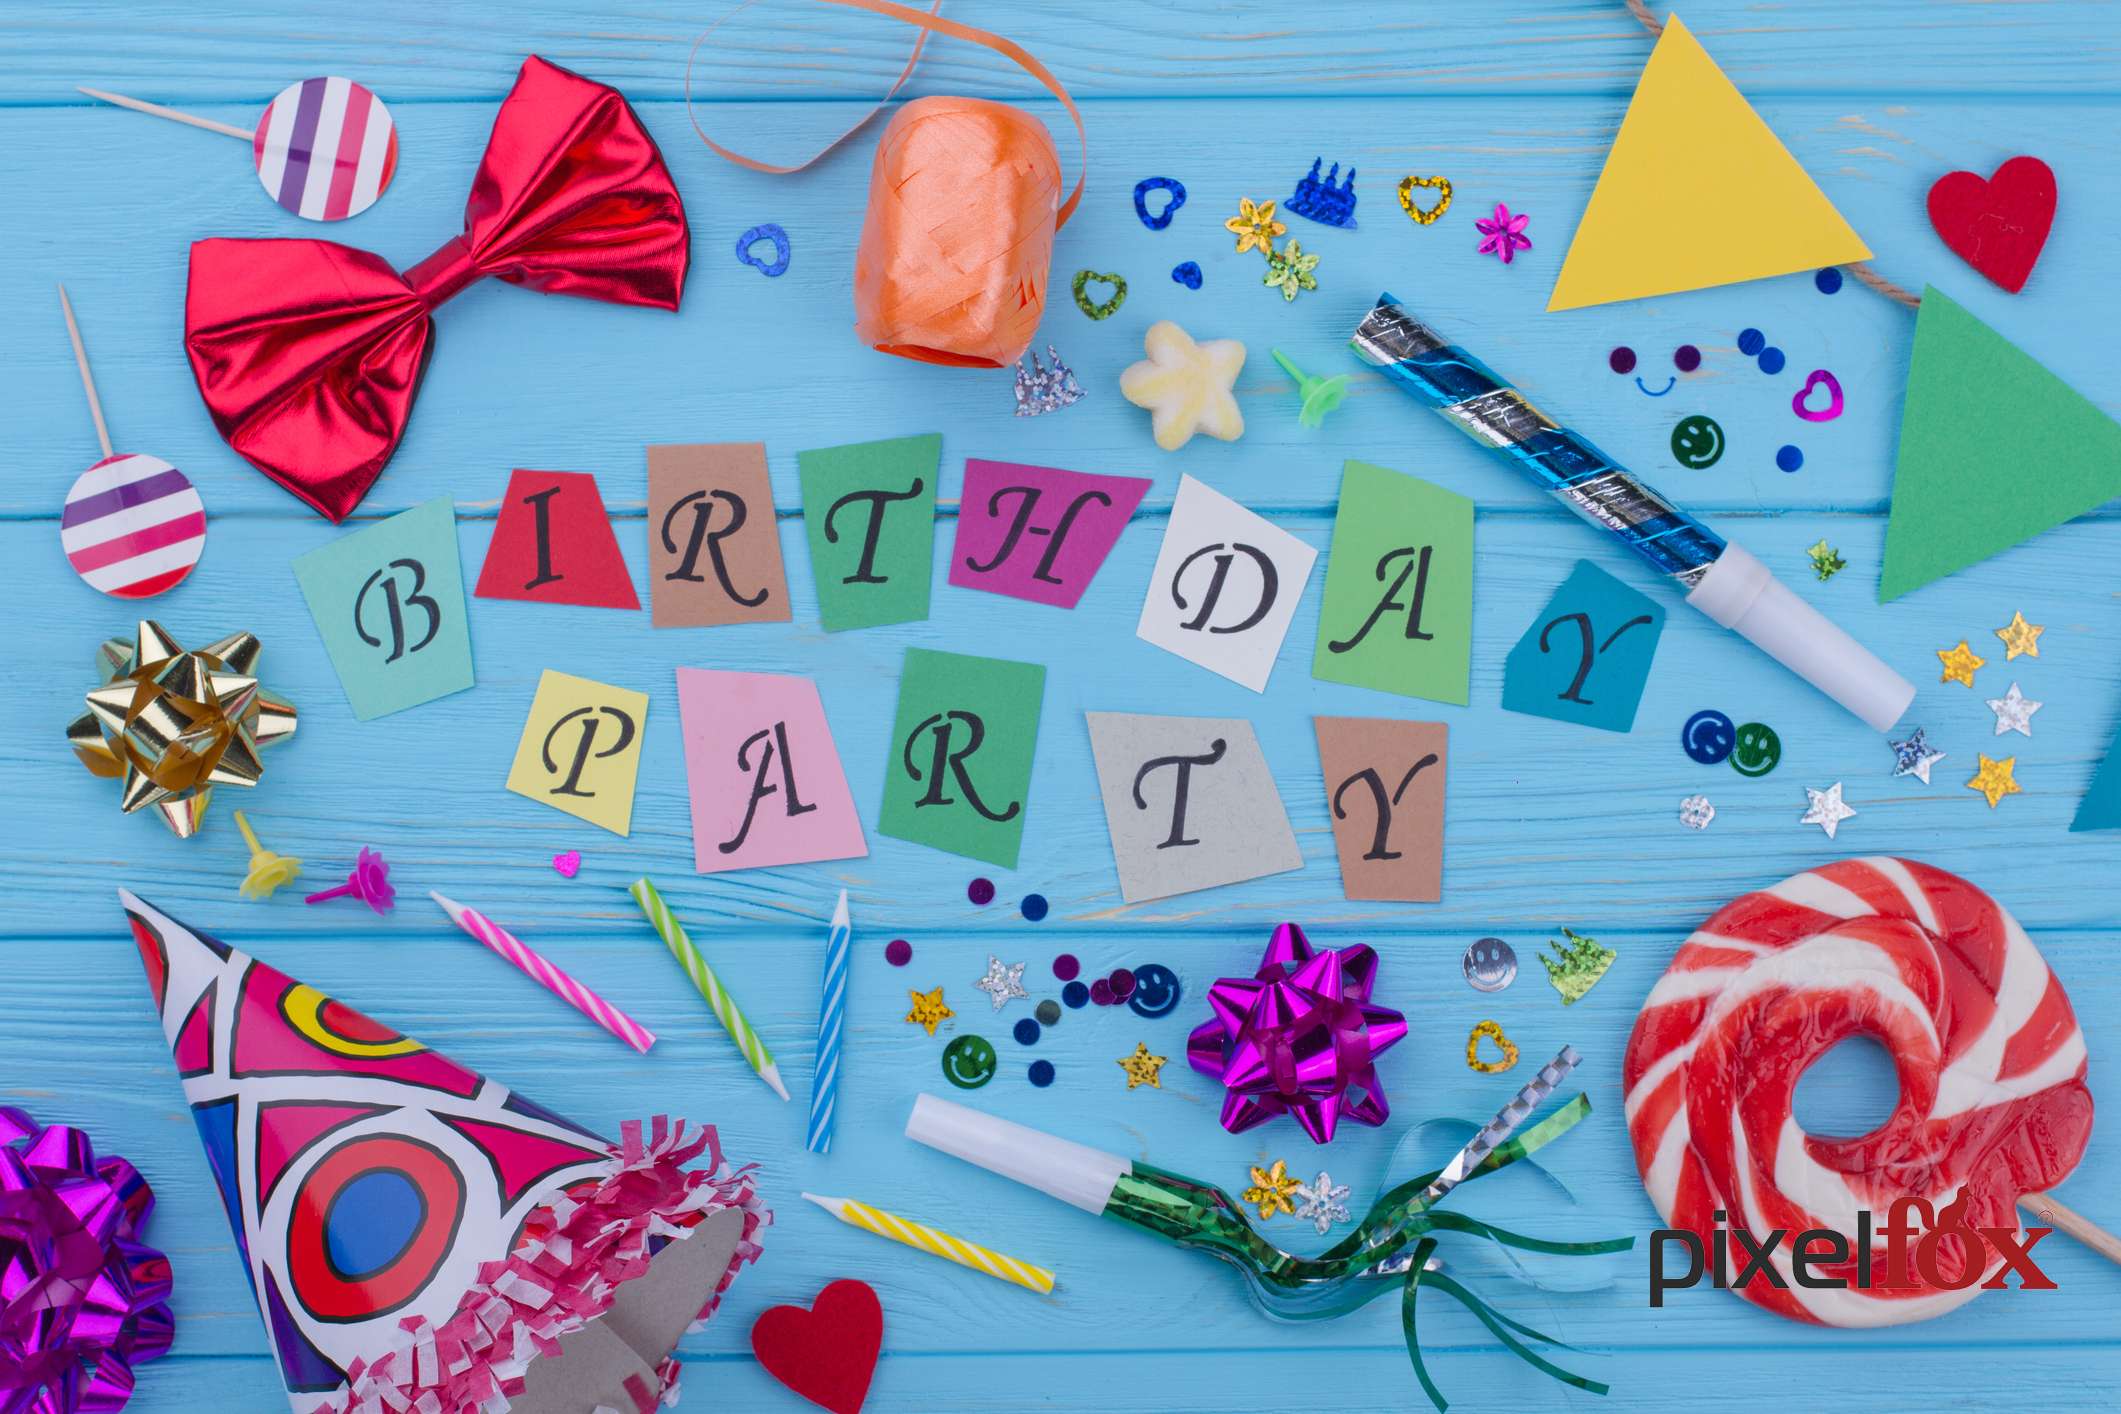 How to plan the perfect birthday party with the perfect Birthday decorations items